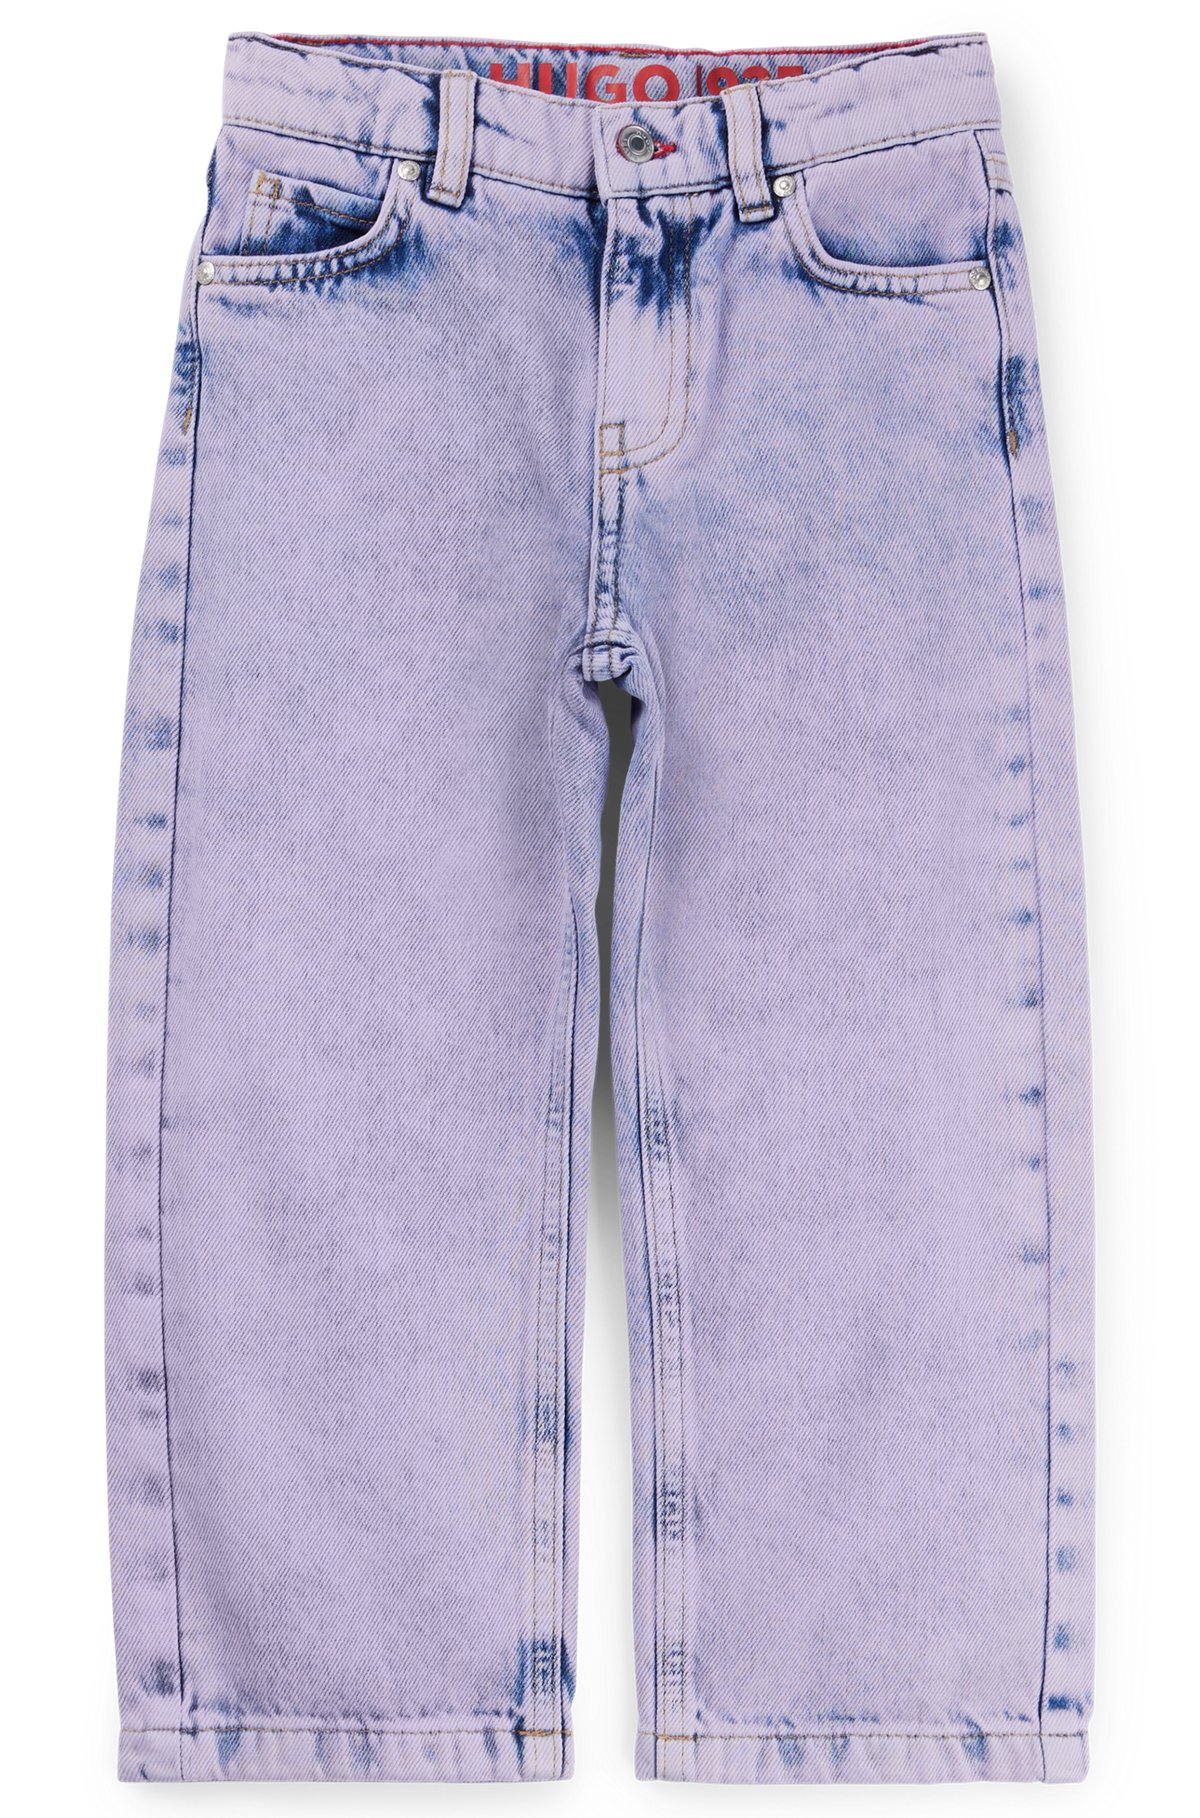 HUGO - Kids' relaxed-fit jeans in overdyed purple denim